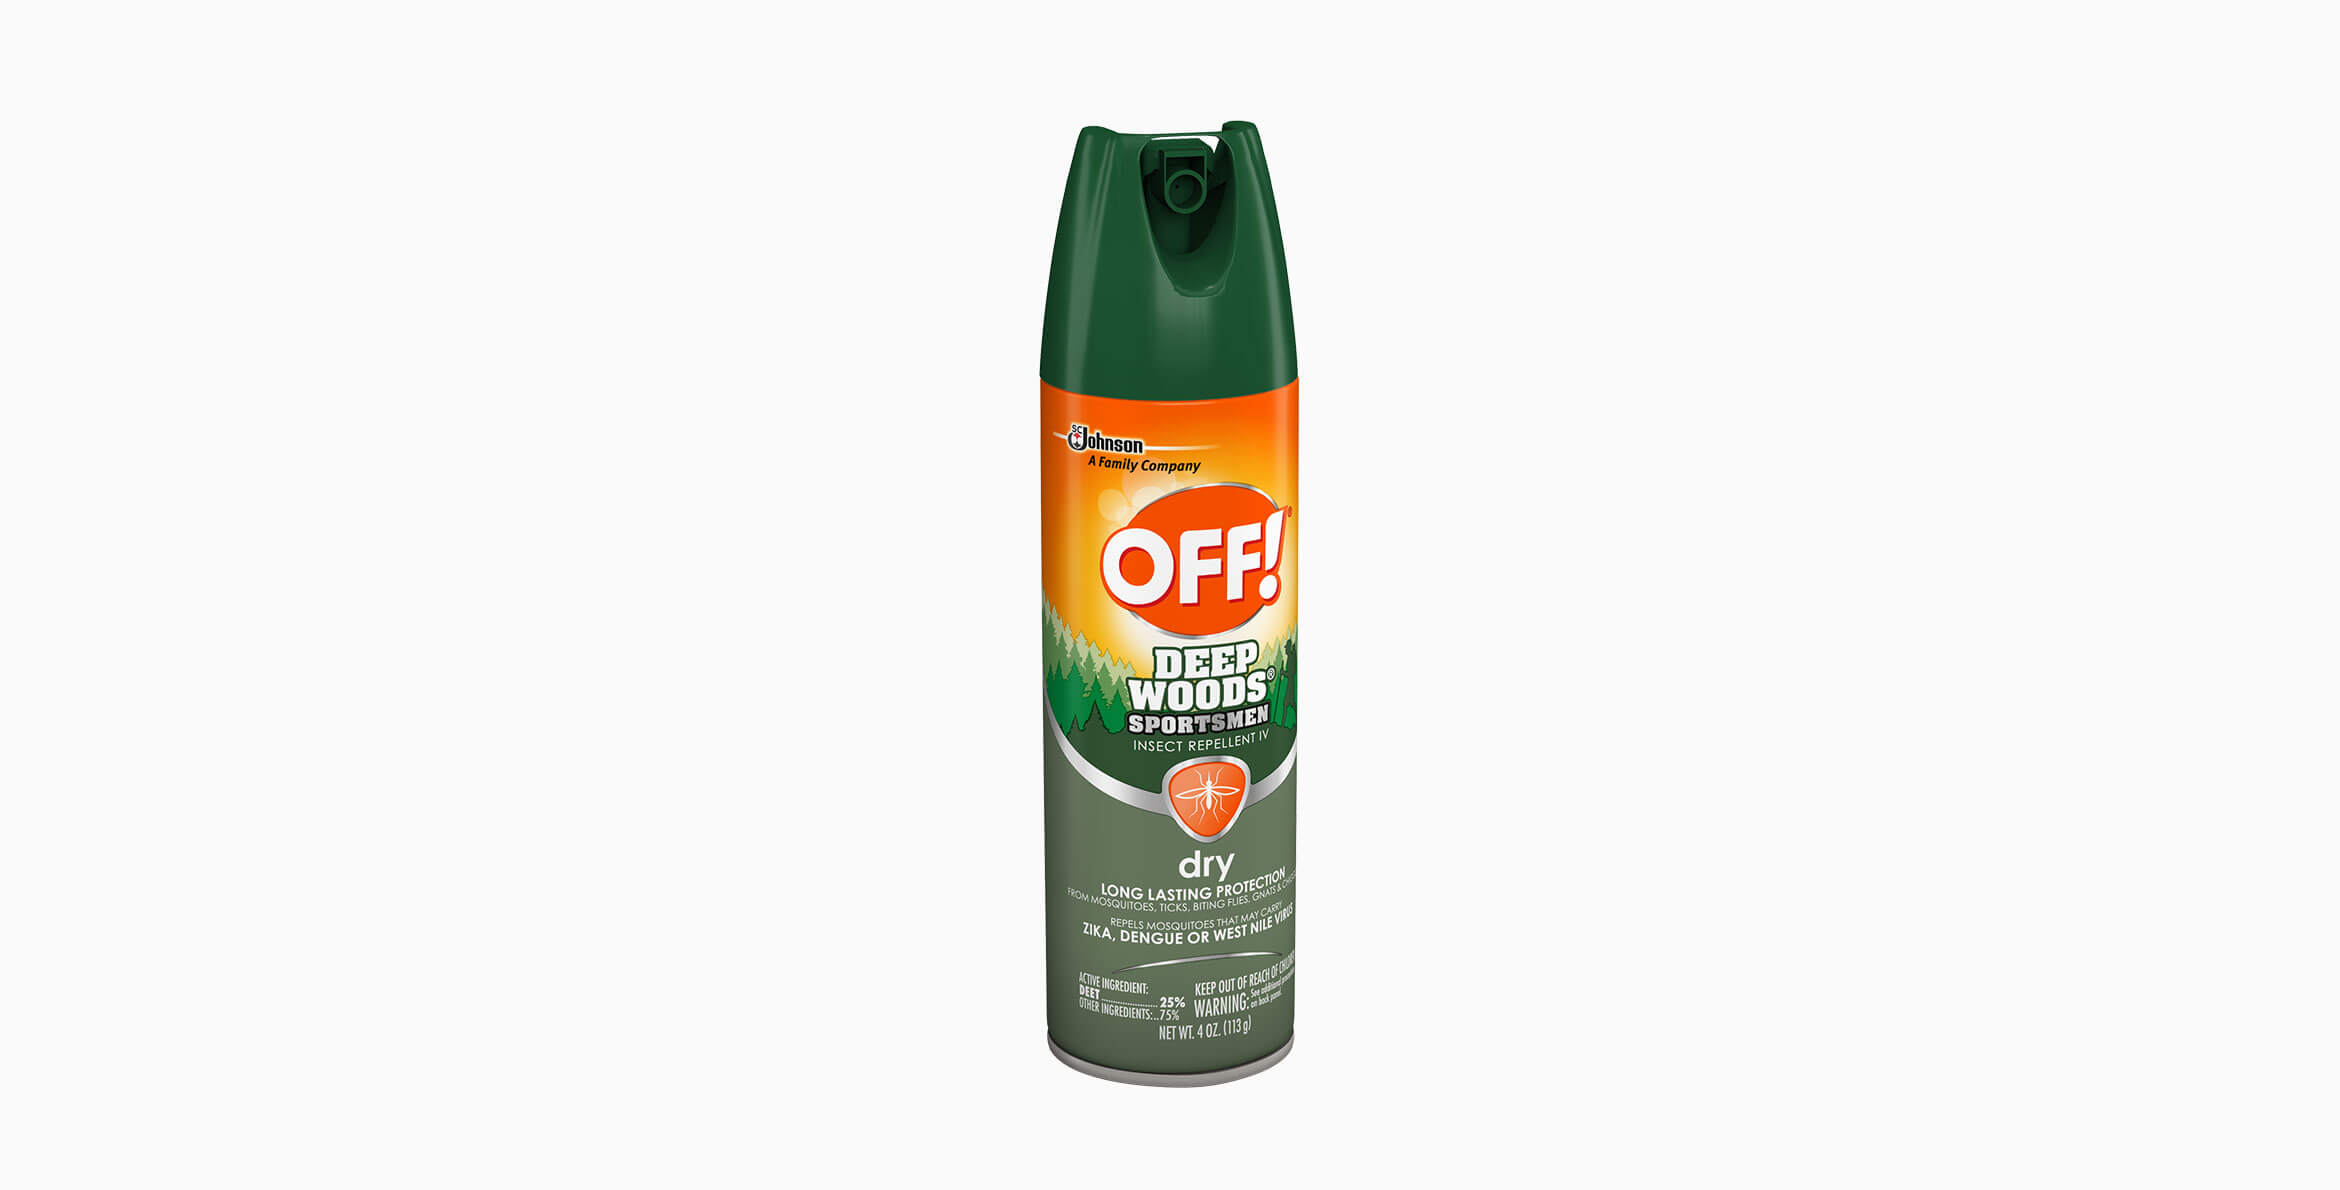 OFF!® Sportsmen Deep Woods® Dry Insect Repellent 5